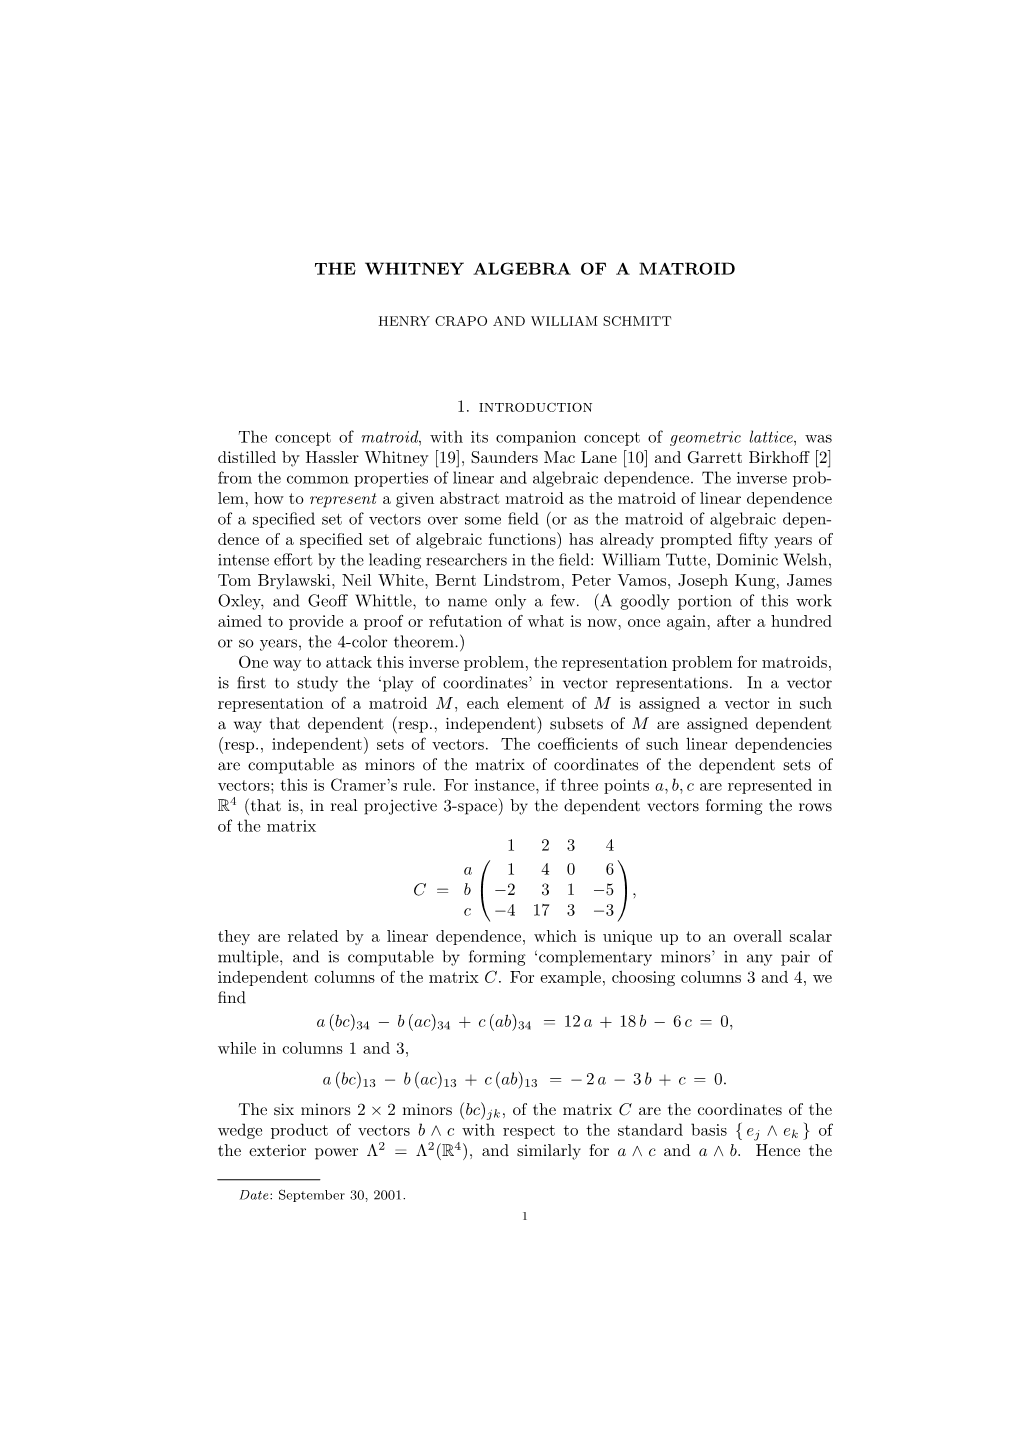 THE WHITNEY ALGEBRA of a MATROID 1. Introduction The